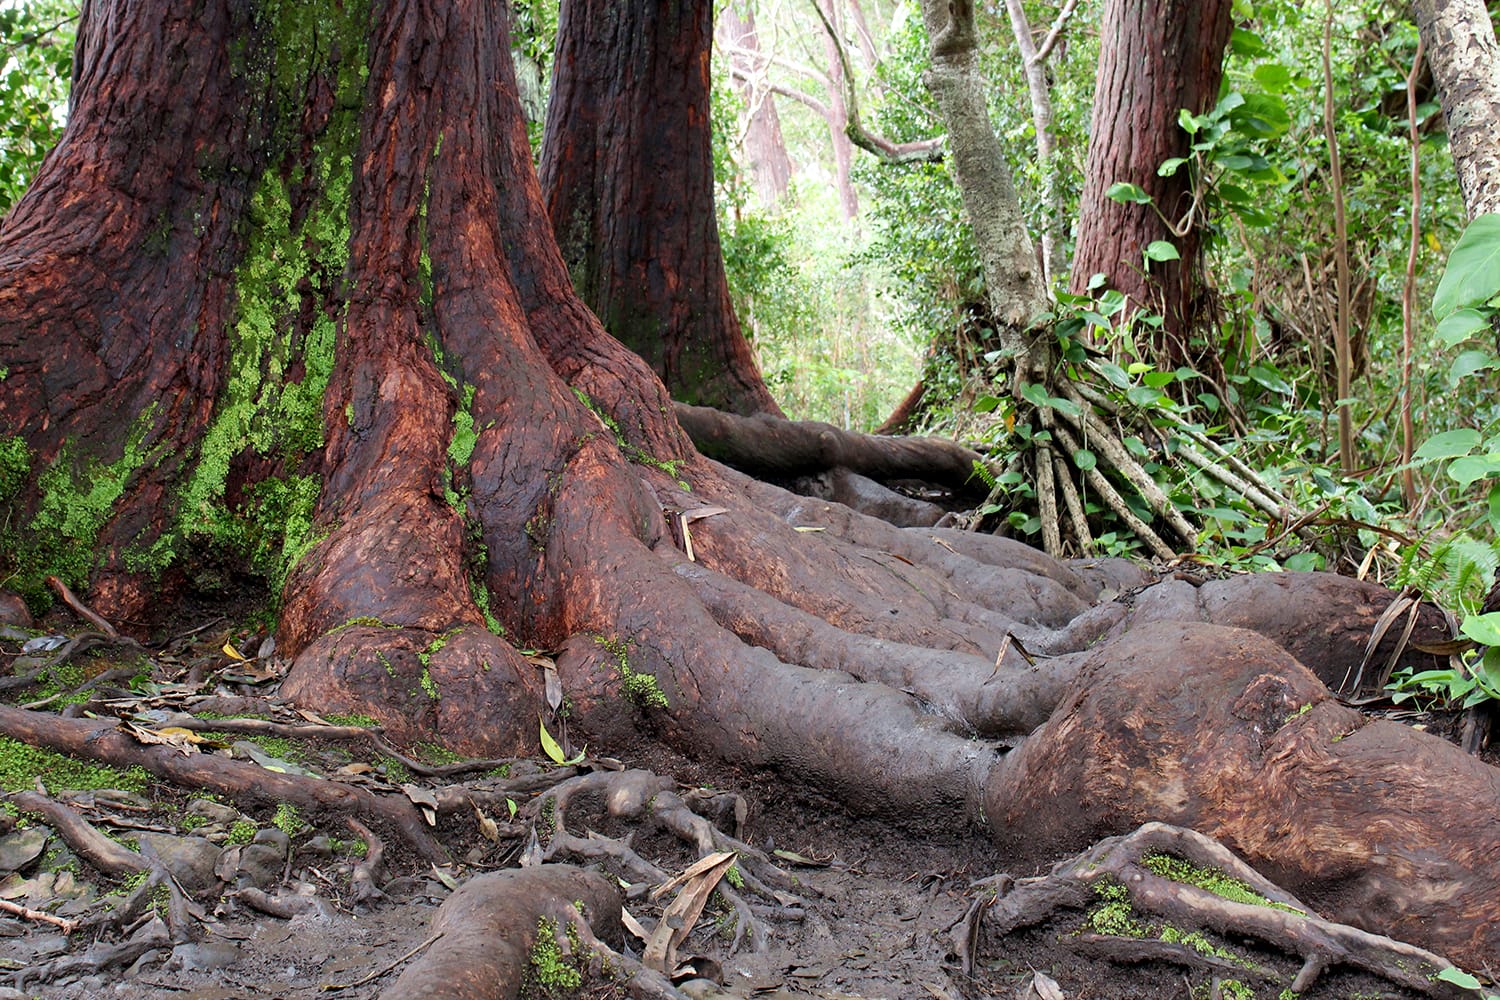 The trunk and roots of a Redwood tree in Ko'olau Forest Reserve on the Waikamoi Nature Trail along the road to Hana in Maui, USA